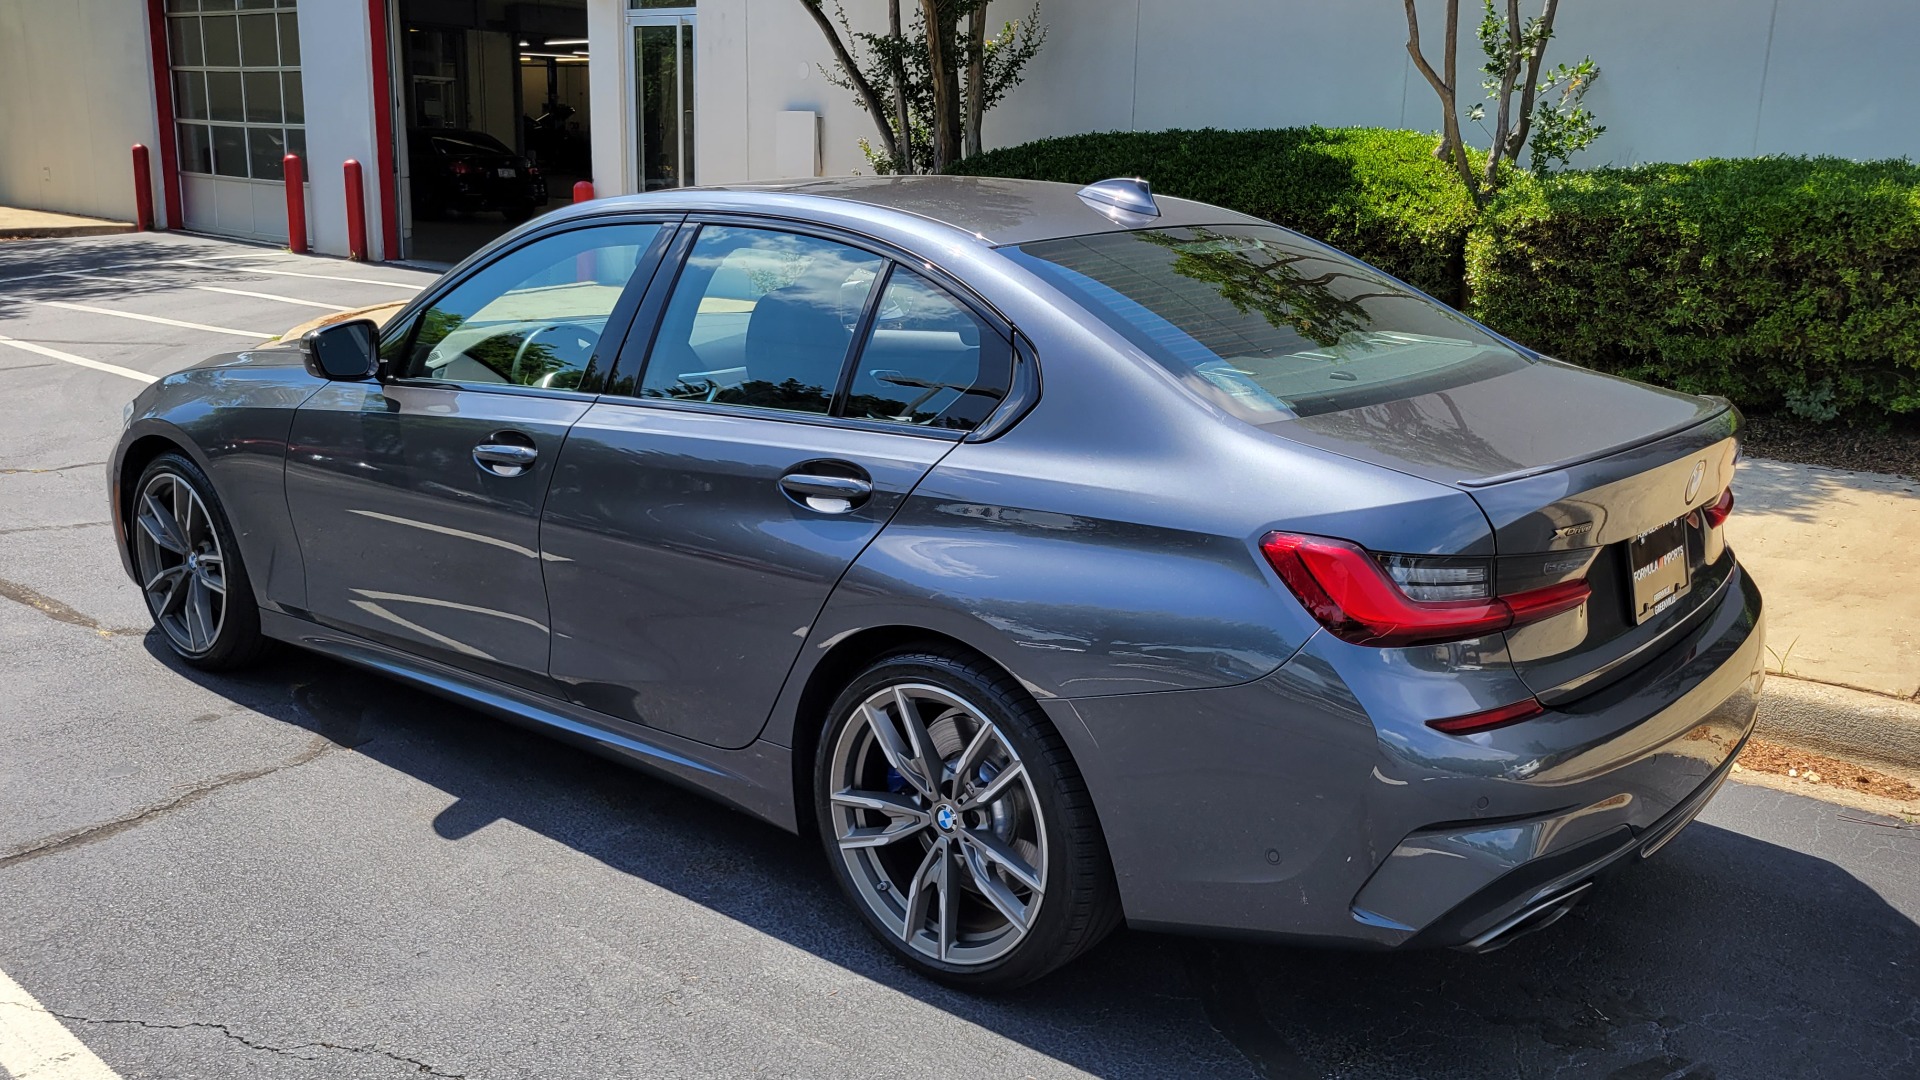 Used 2020 BMW 3 SERIES M340I XDRIVE / PREMIUM / DRVR ASST / H/K SND / REARVIEW for sale $49,595 at Formula Imports in Charlotte NC 28227 3